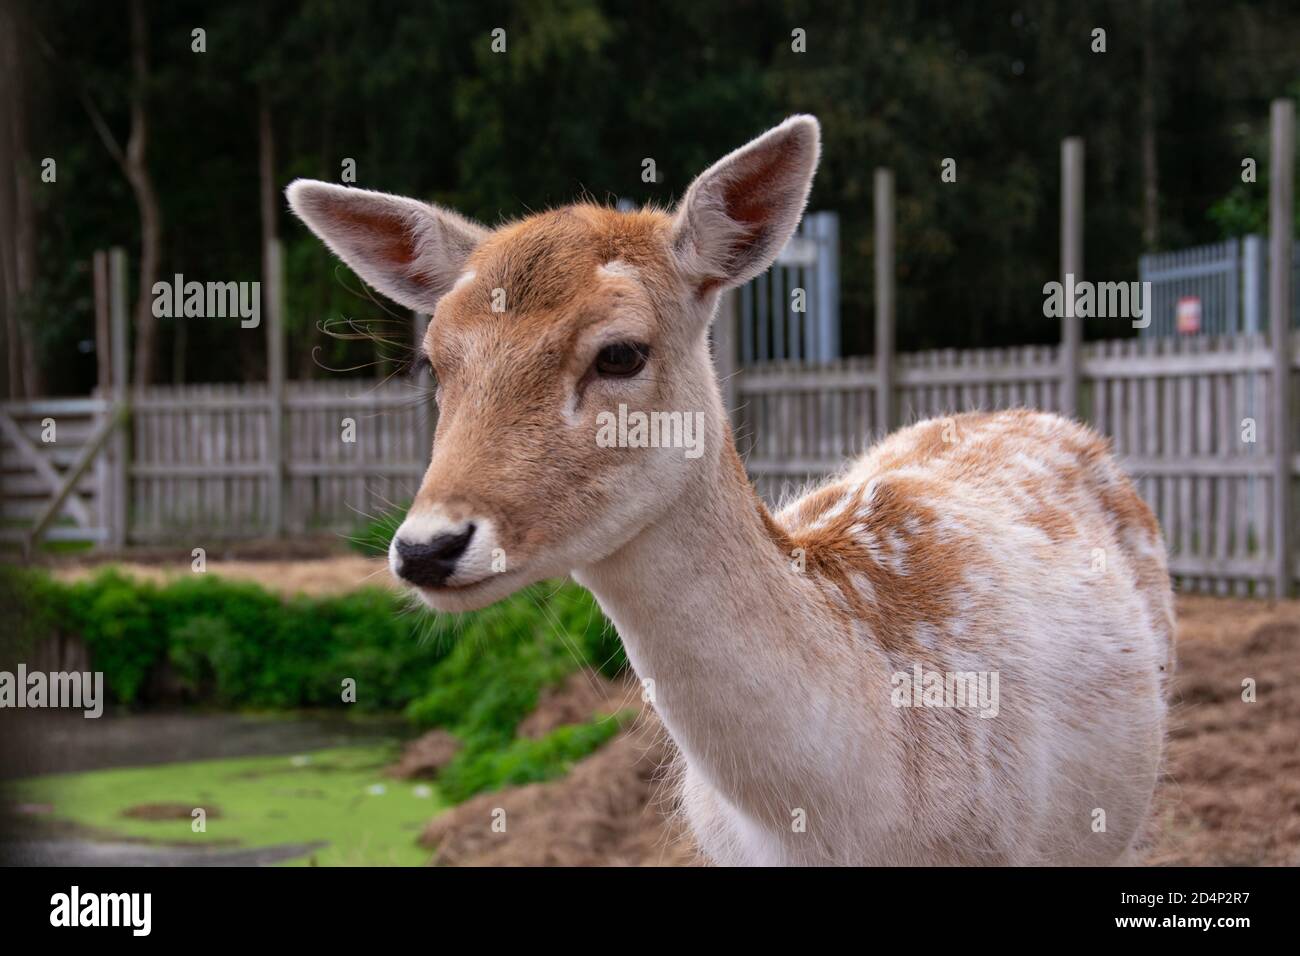 Deer close-up, picture has been taken at the kids farm helderse vallei in the netherlands. Stock Photo